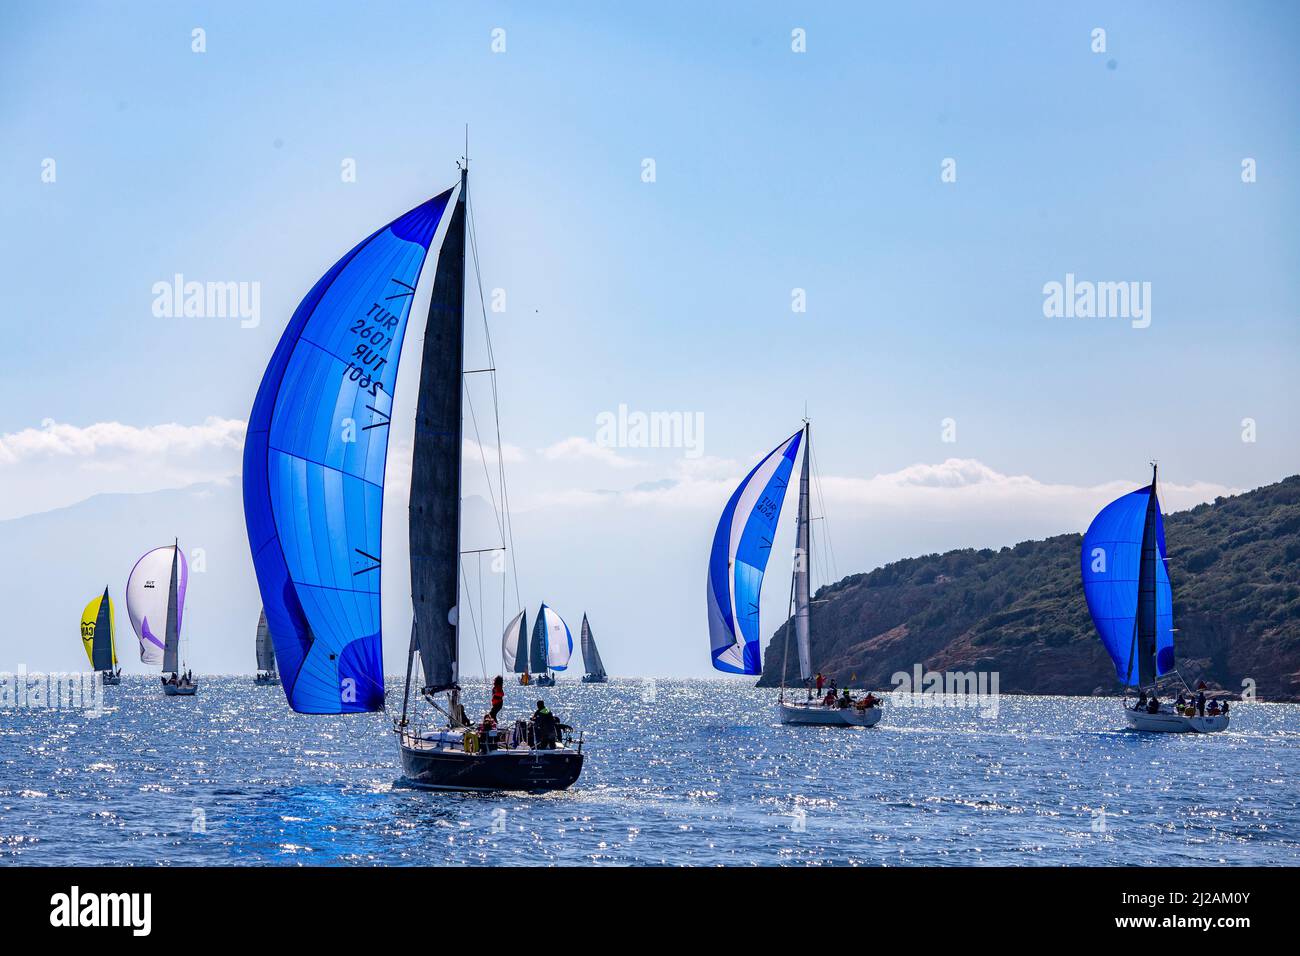 Bodrum, Mugla, Turkey - 02.25.2022: Three in a row Ship yachts with blue sails on shiny waters of Aegean Sea. Sailboats sail in windy weather. Regatta Stock Photo